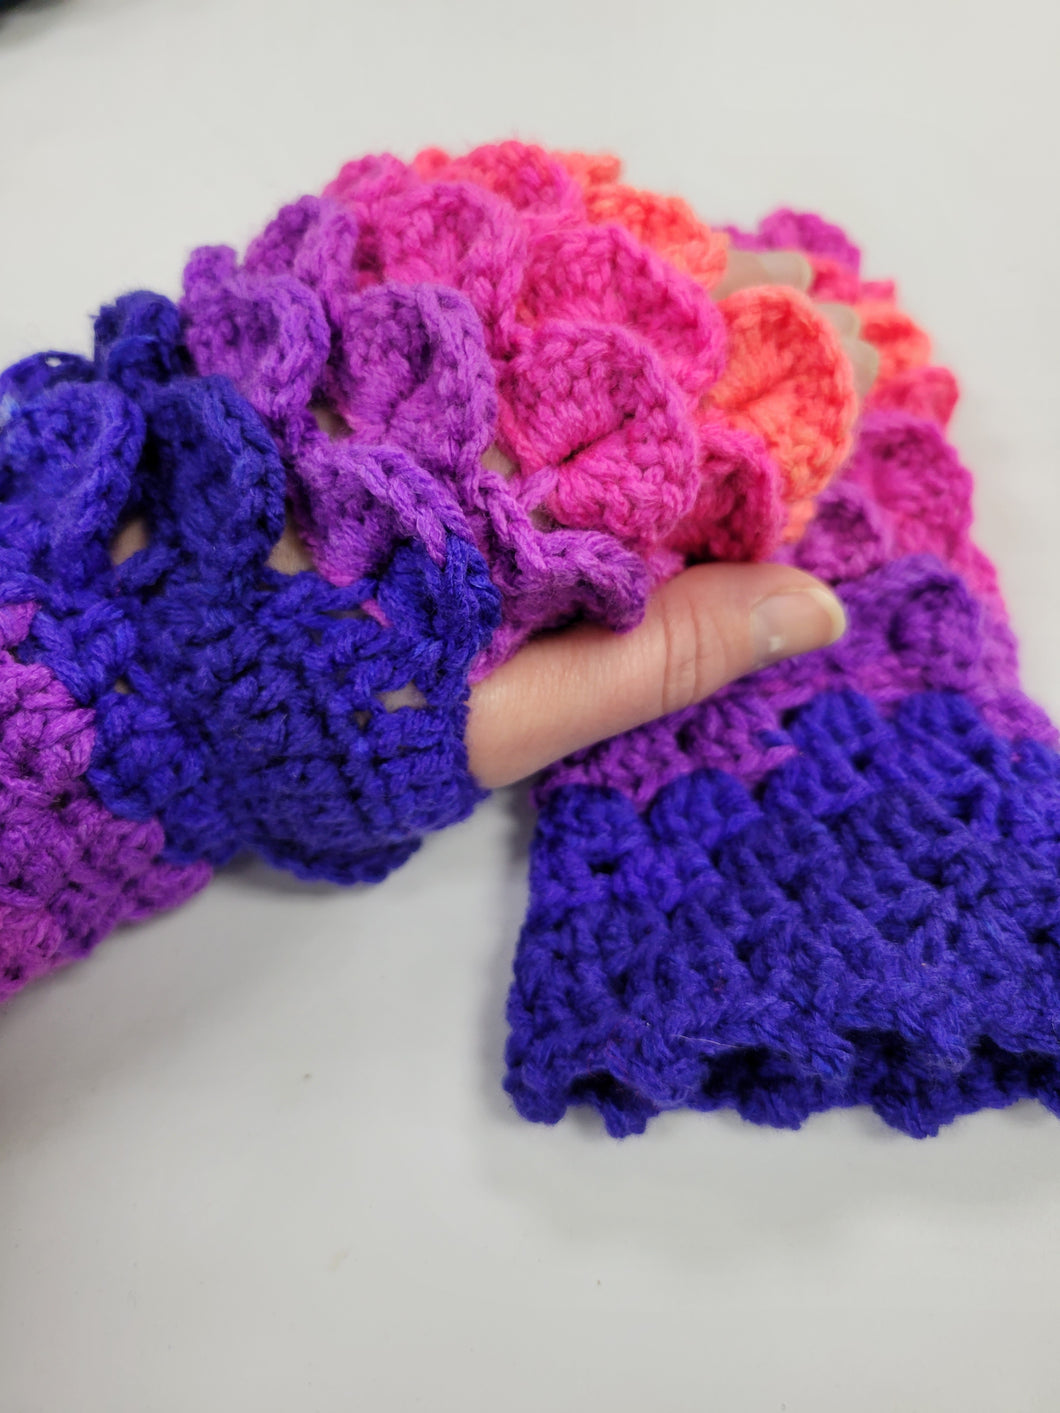 Crocheted Dragonscale Fingerless Gloves - Bright Colors